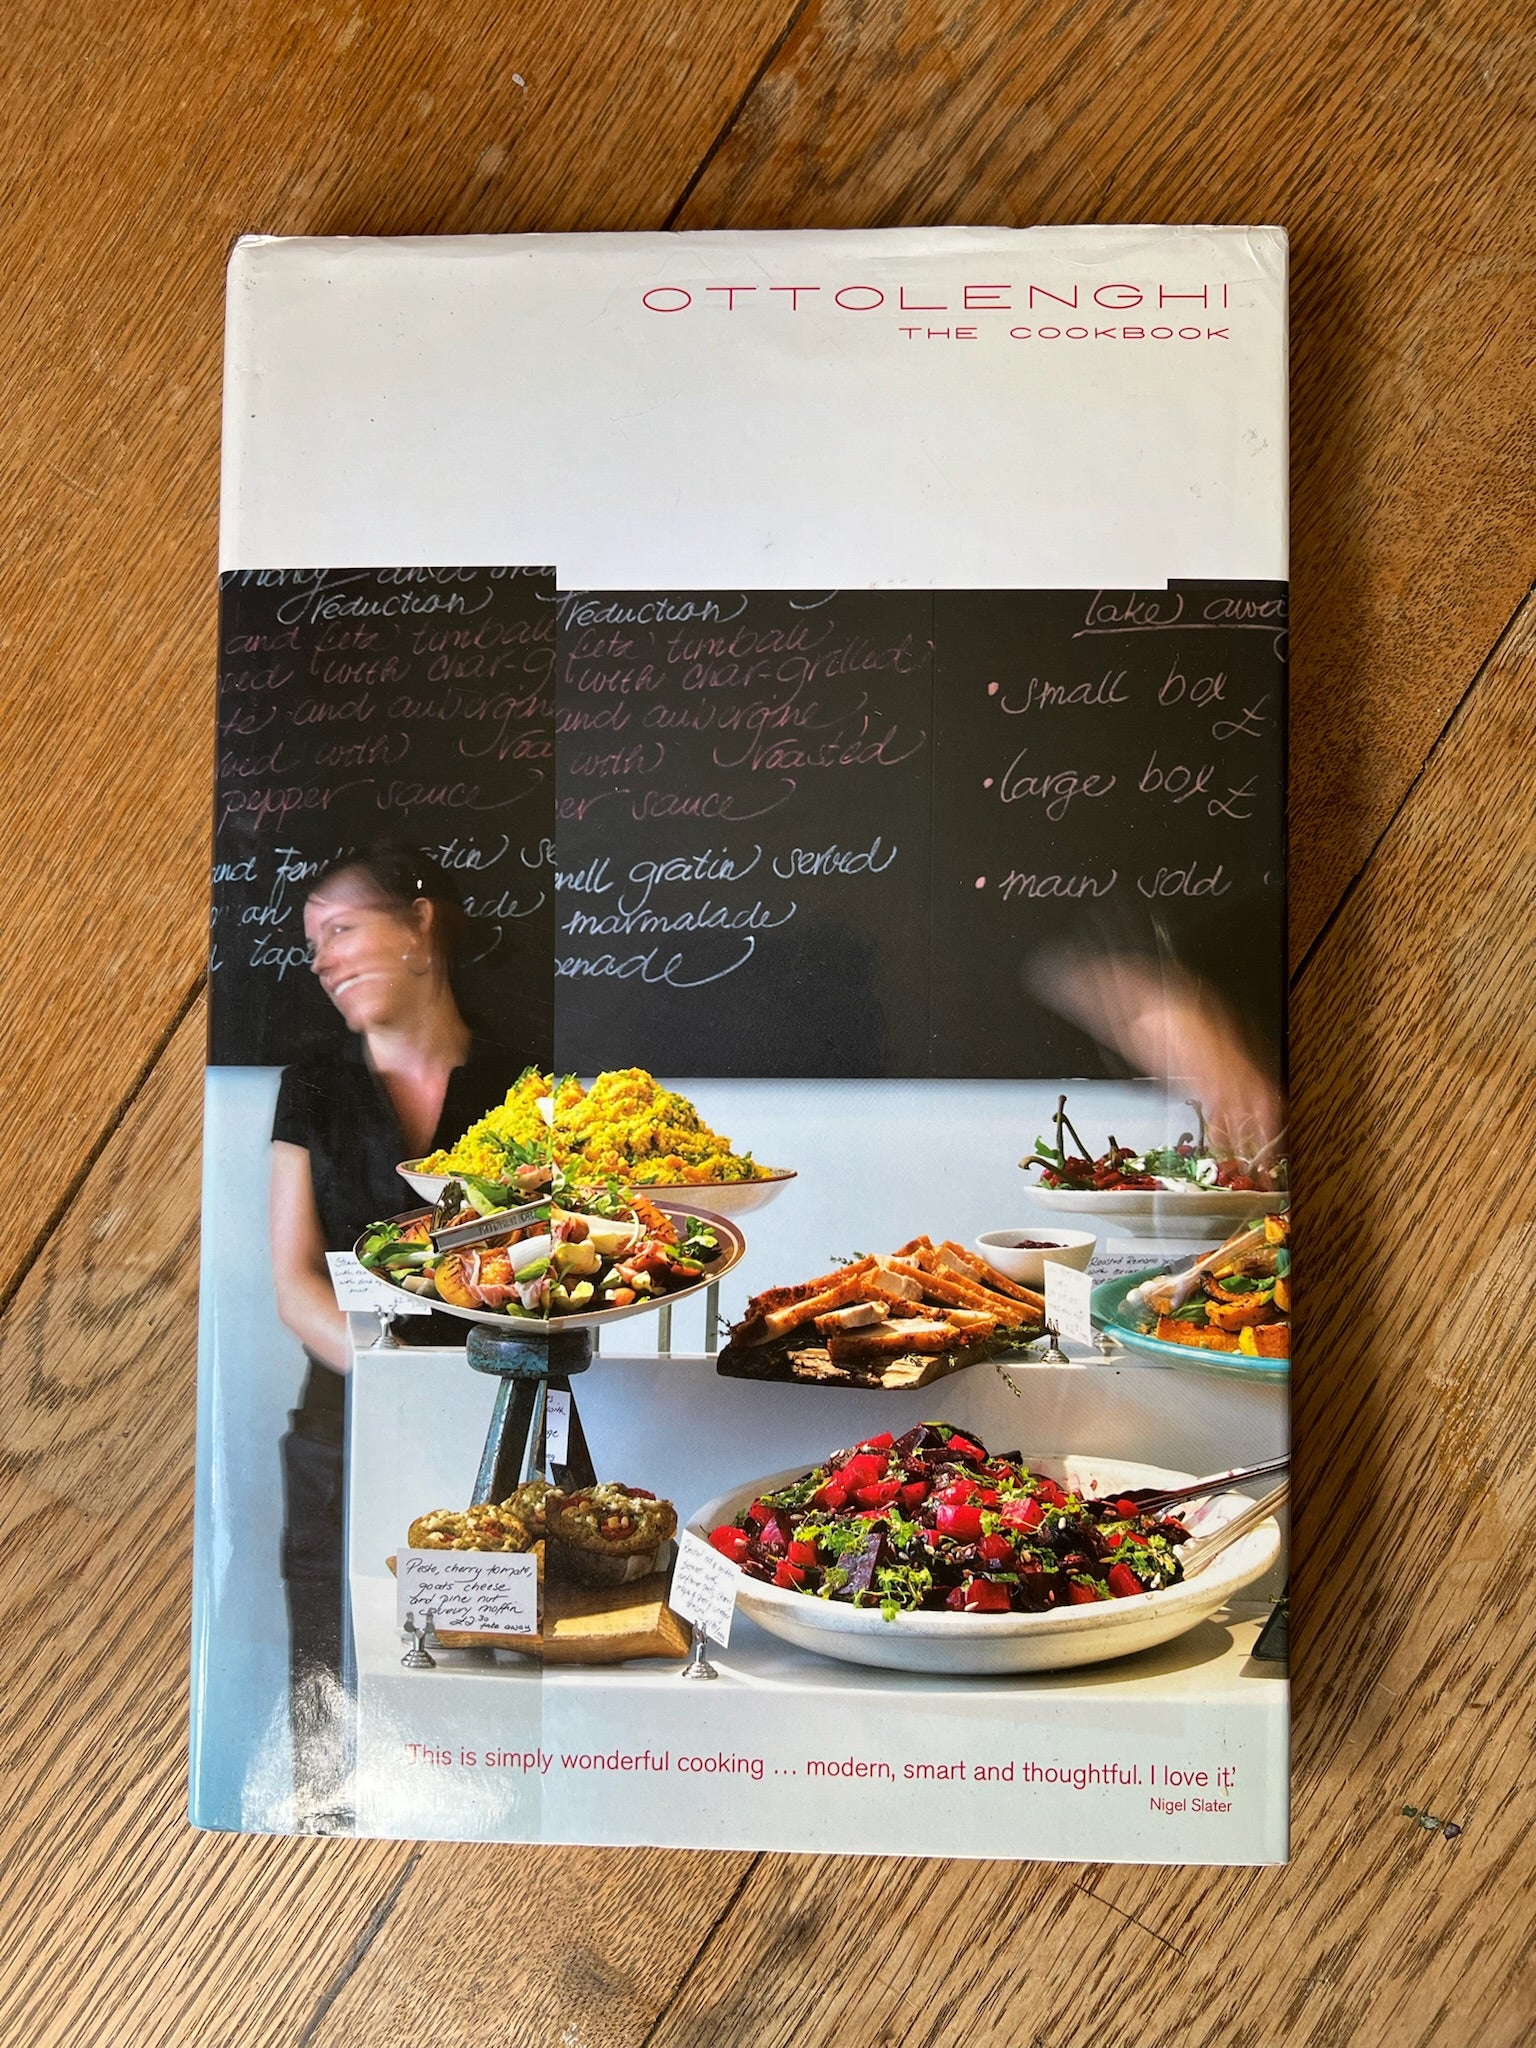 “OTTOLENGHI THE COOKBOOK”